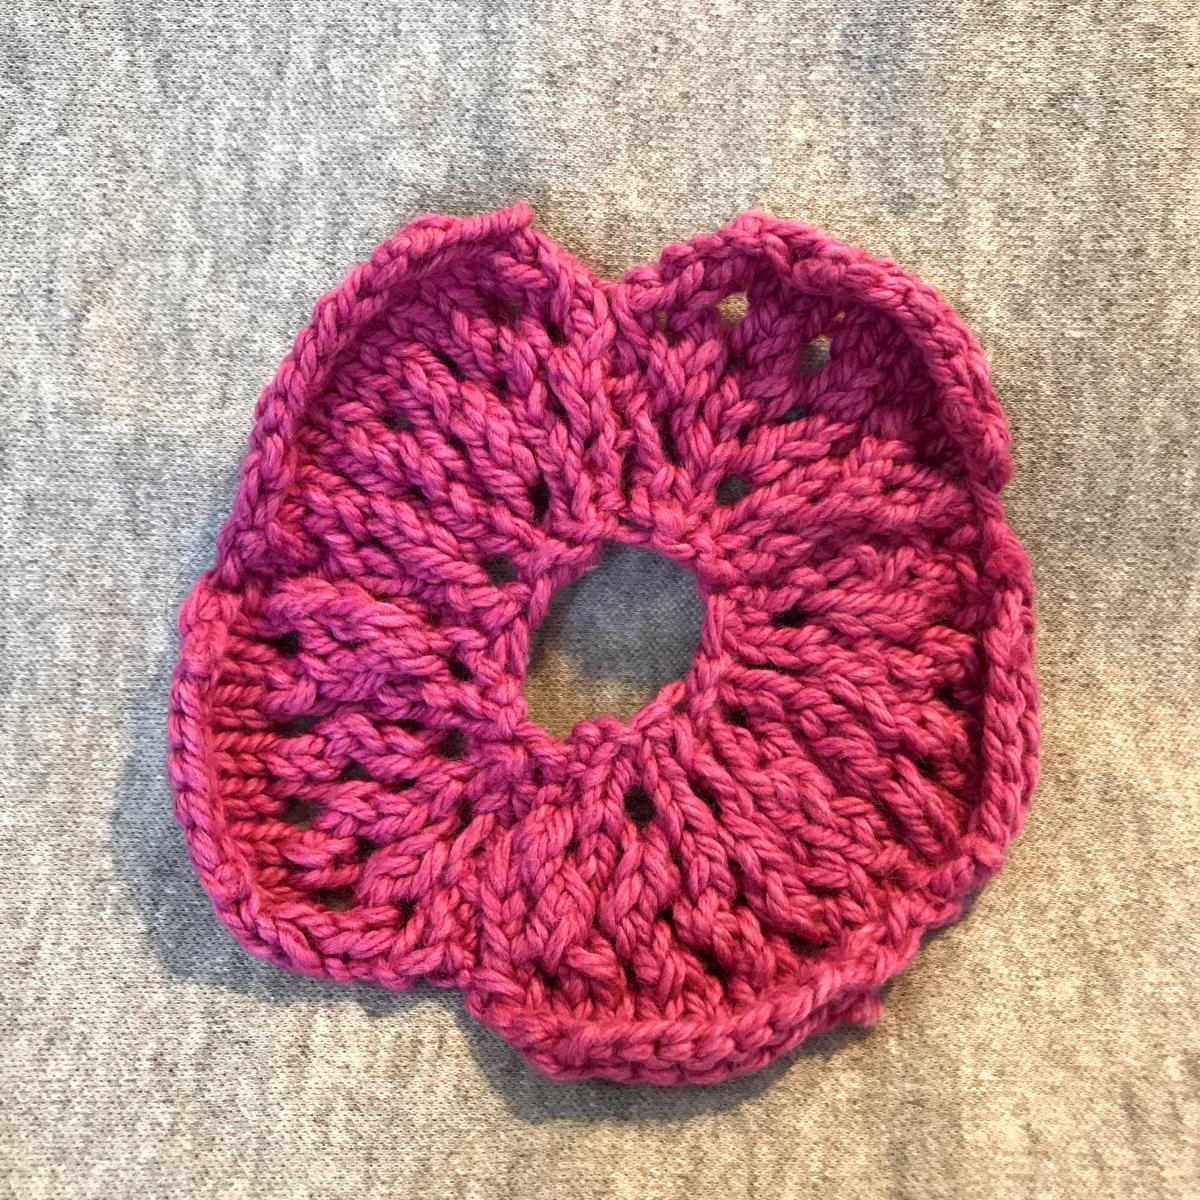 A pink knitted circle